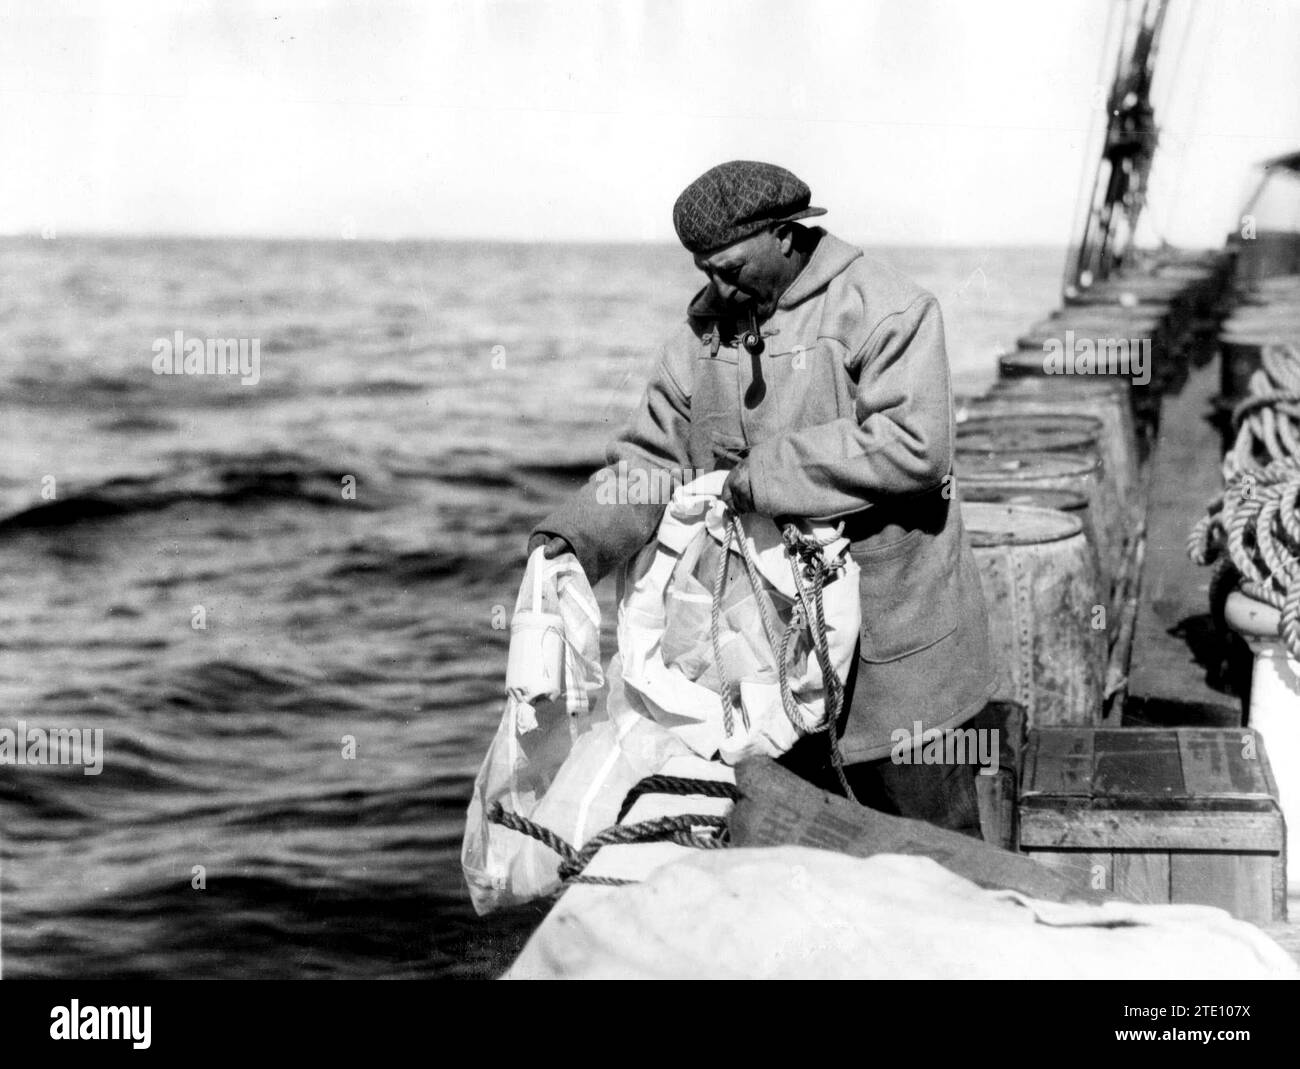 12/31/1928. In the Image, Robert Bartlett, Captain of the 'Morrisey', Setting the Nets for Fishing. Credit: Album / Archivo ABC / Vidal Stock Photo